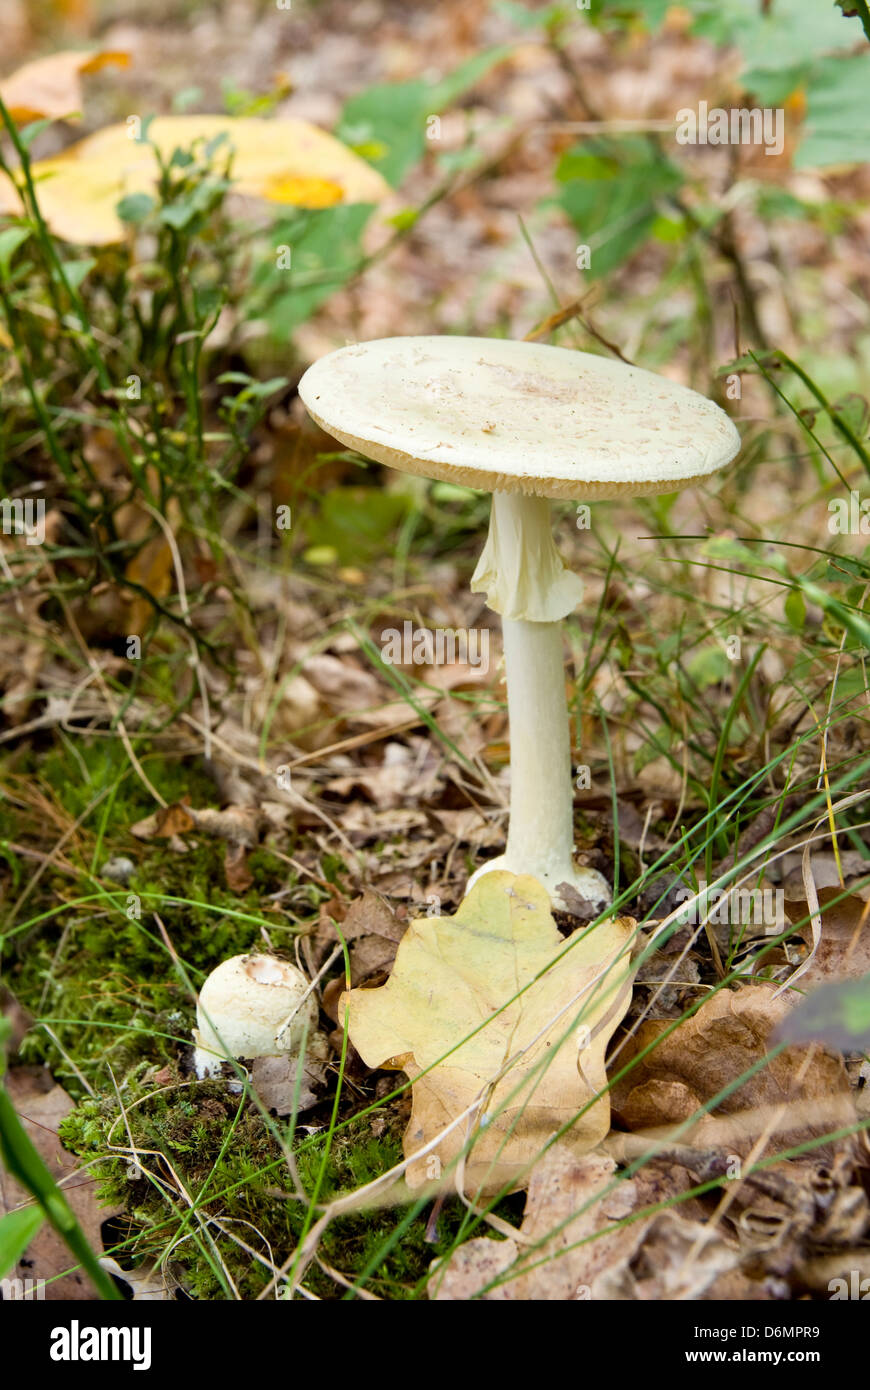 spotted mushroom poisonous in the grass Stock Photo